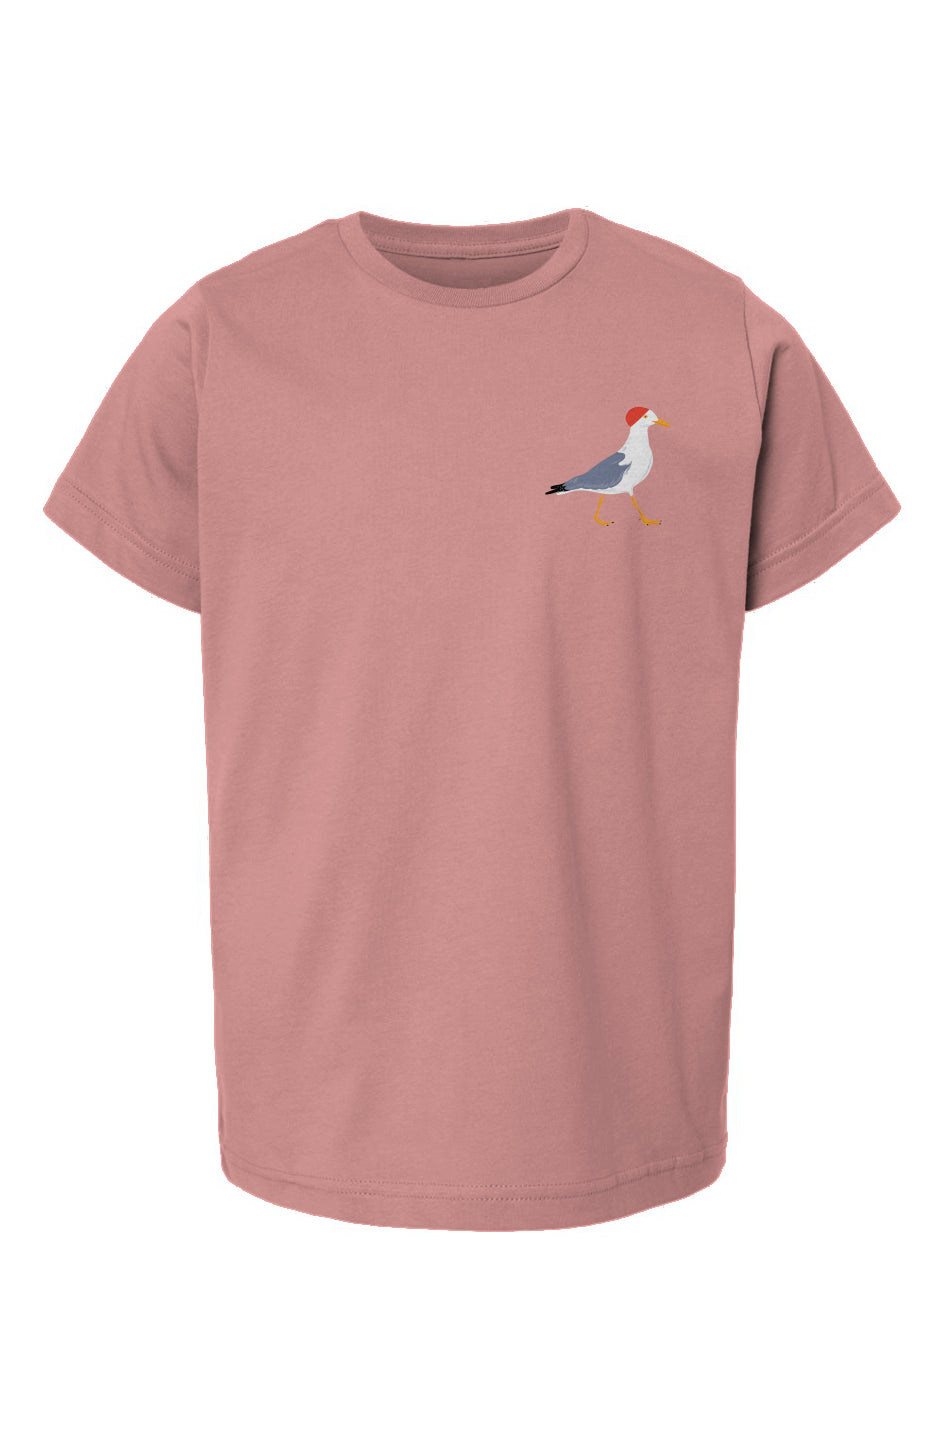 Steven SeaGull Youth Tee